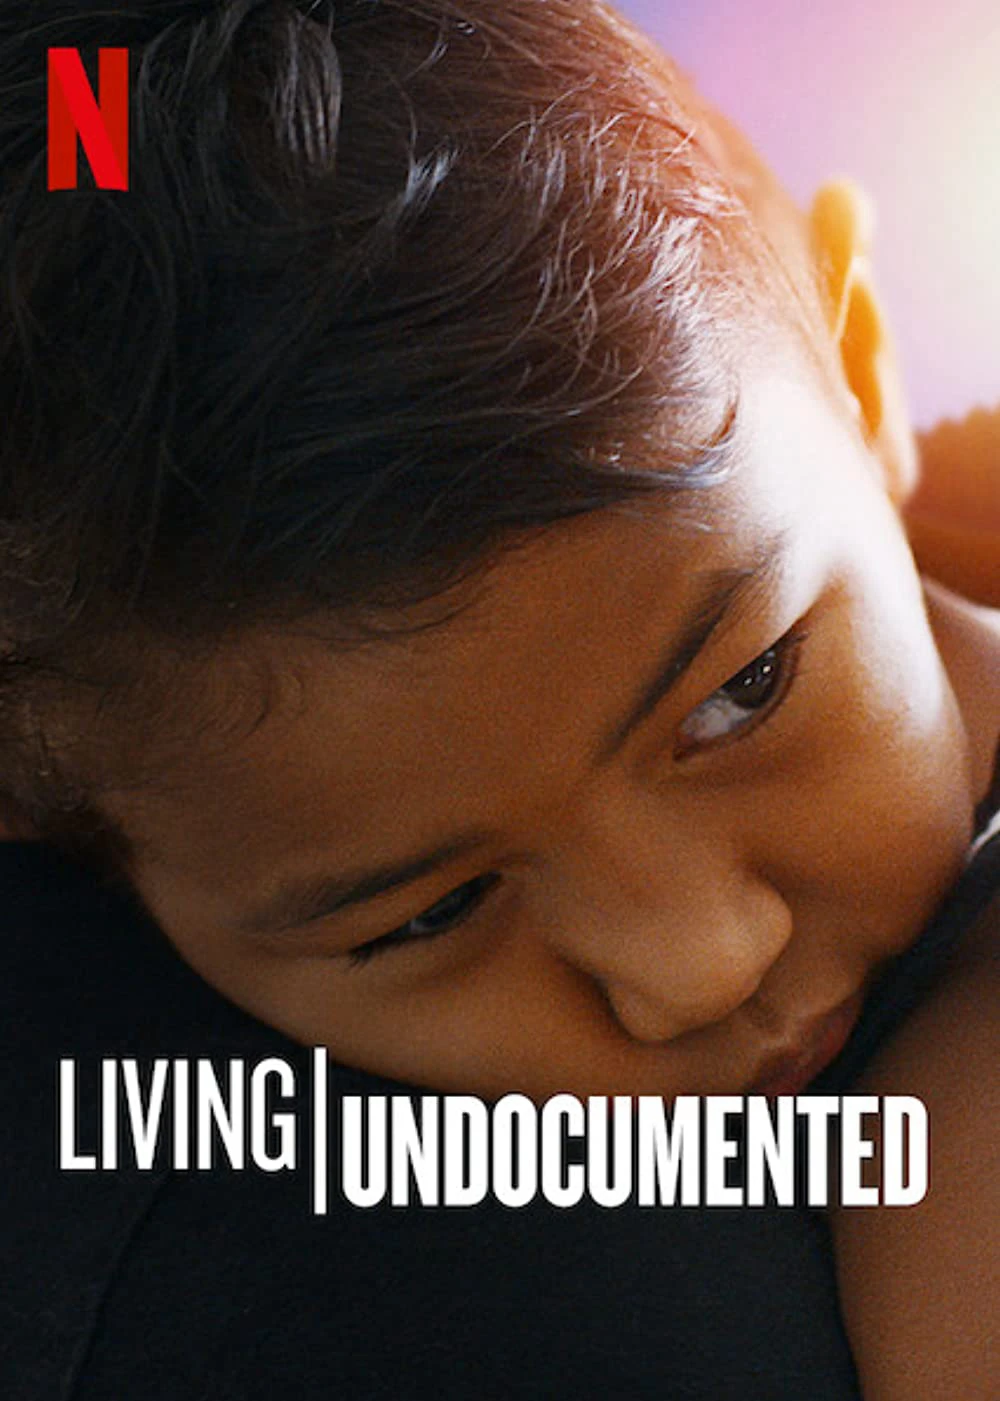 Sống chui | Living Undocumented (2019)